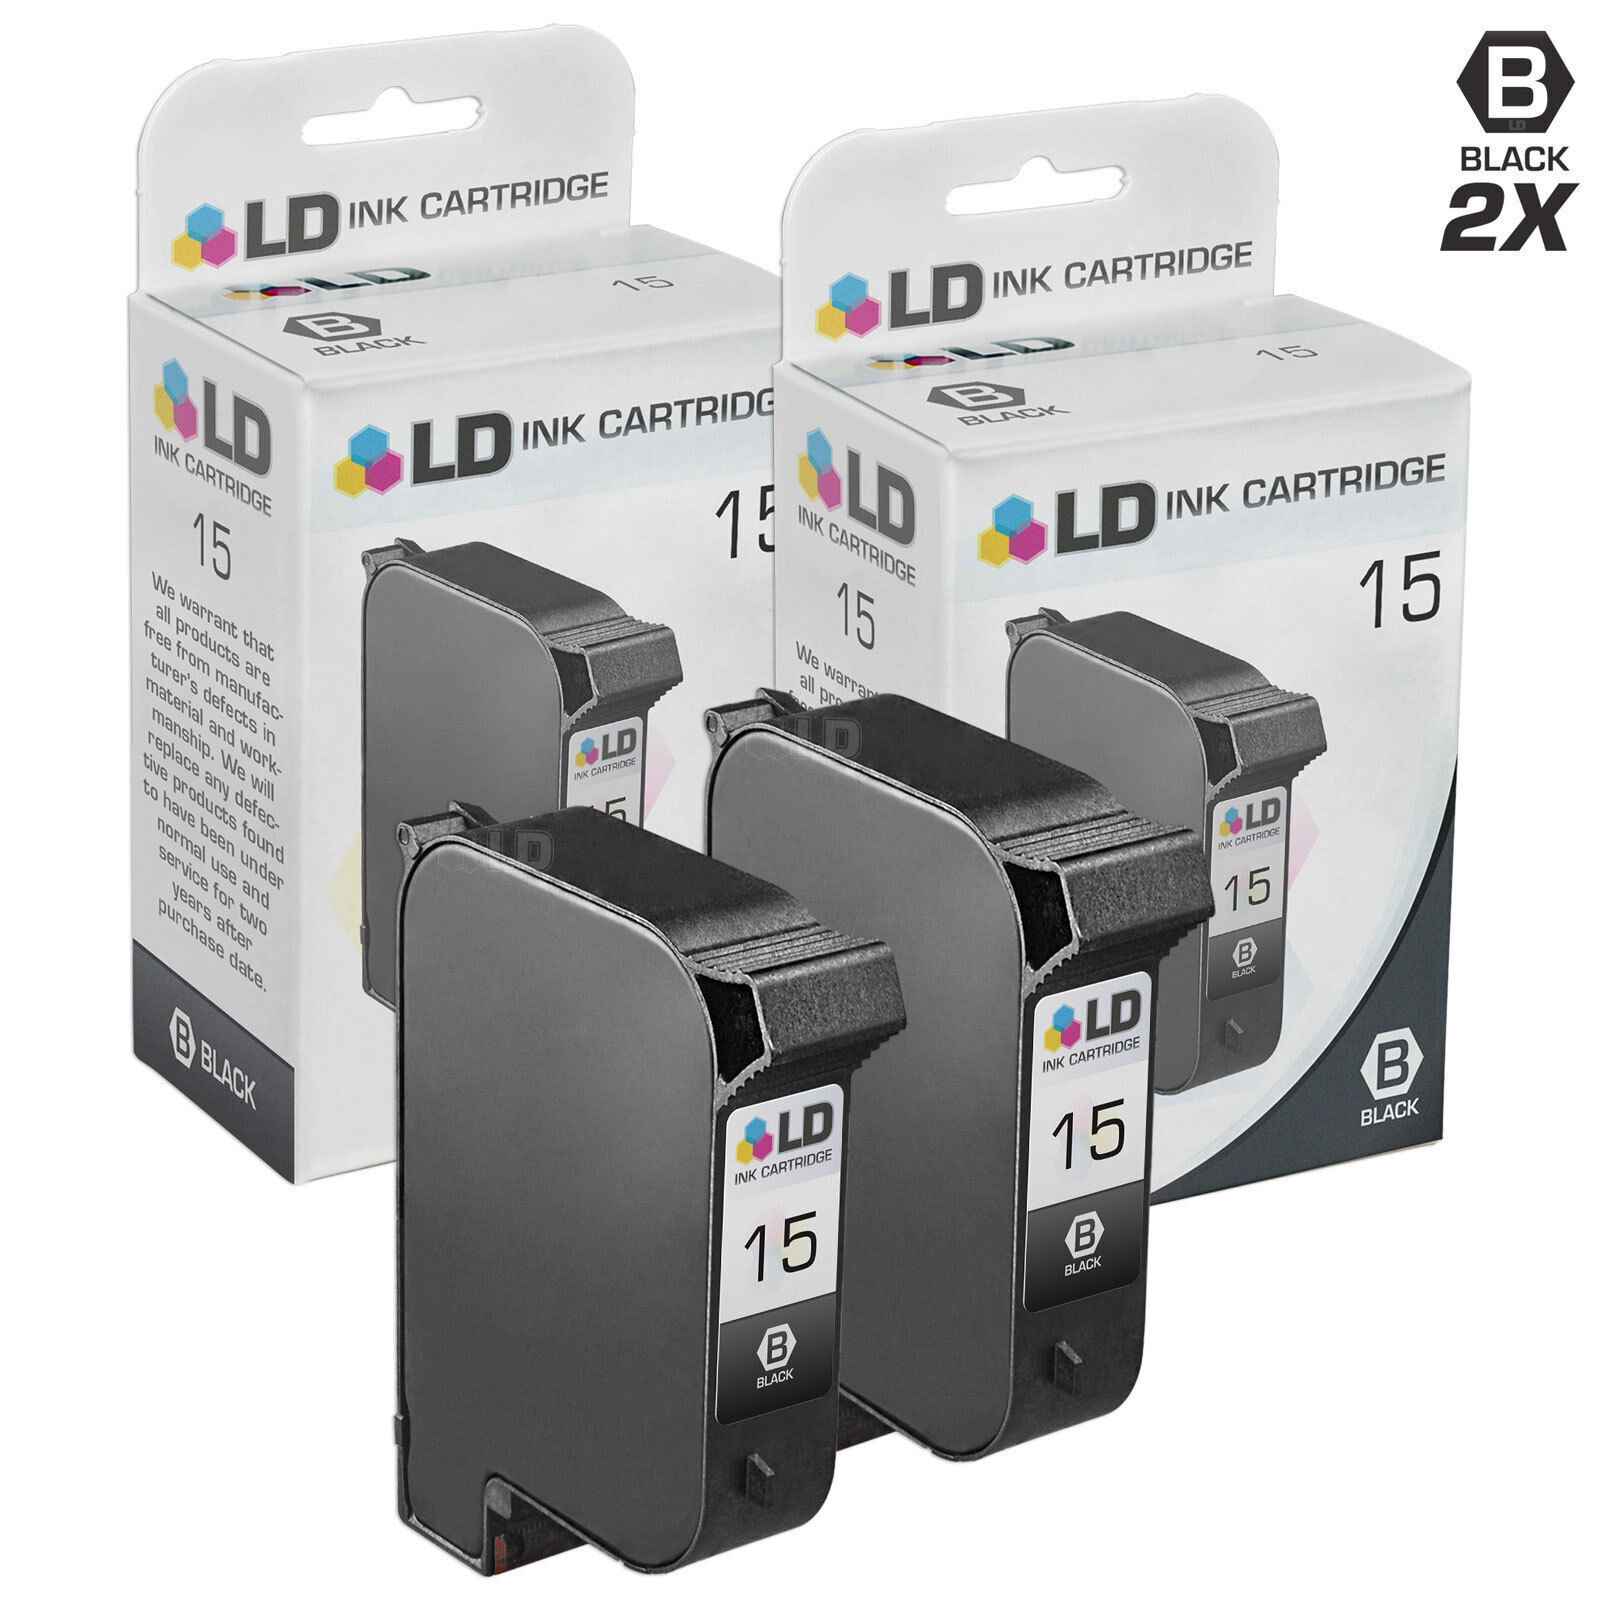 LD Remanufactured Replacements for HP 15 / C6615DN Black Ink Cartridges 2-Pack